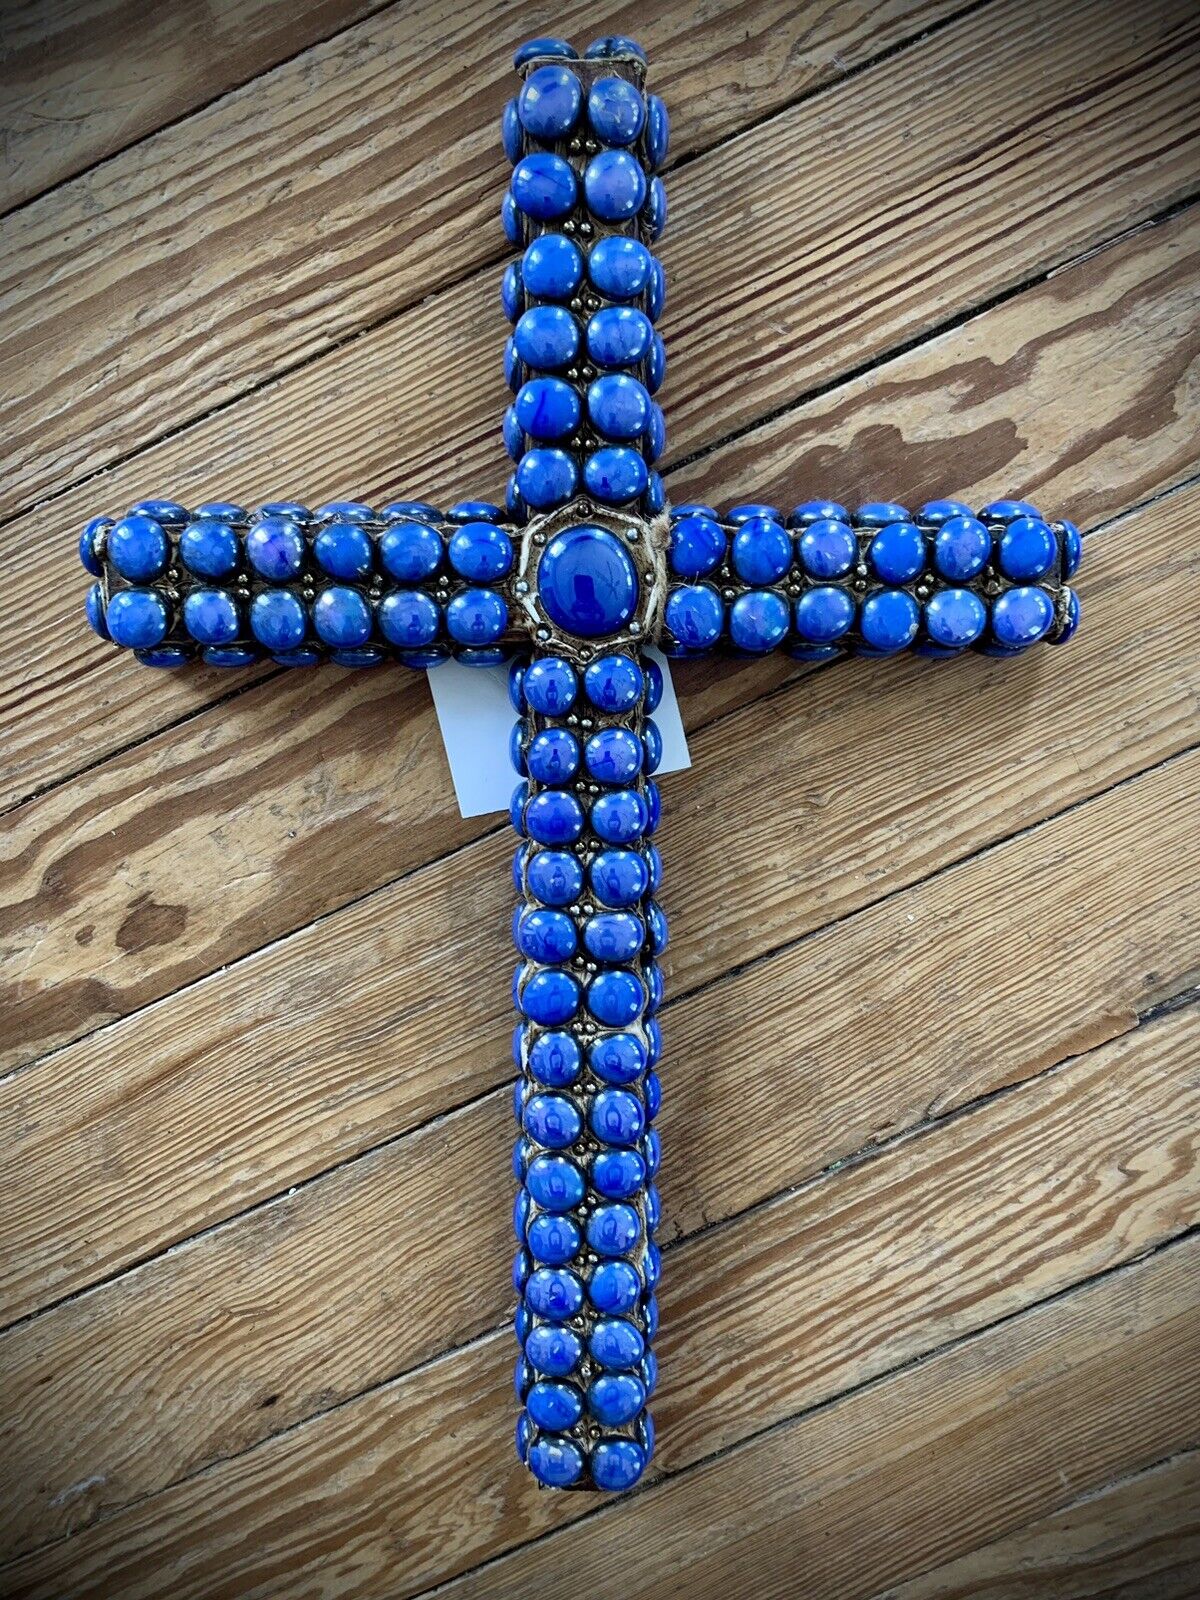 SPECTACULAR UNIQUE GLASS BEADS WALL CROSS MOSAIC HAND CRAFTED ARTiSANS WOOD 18”